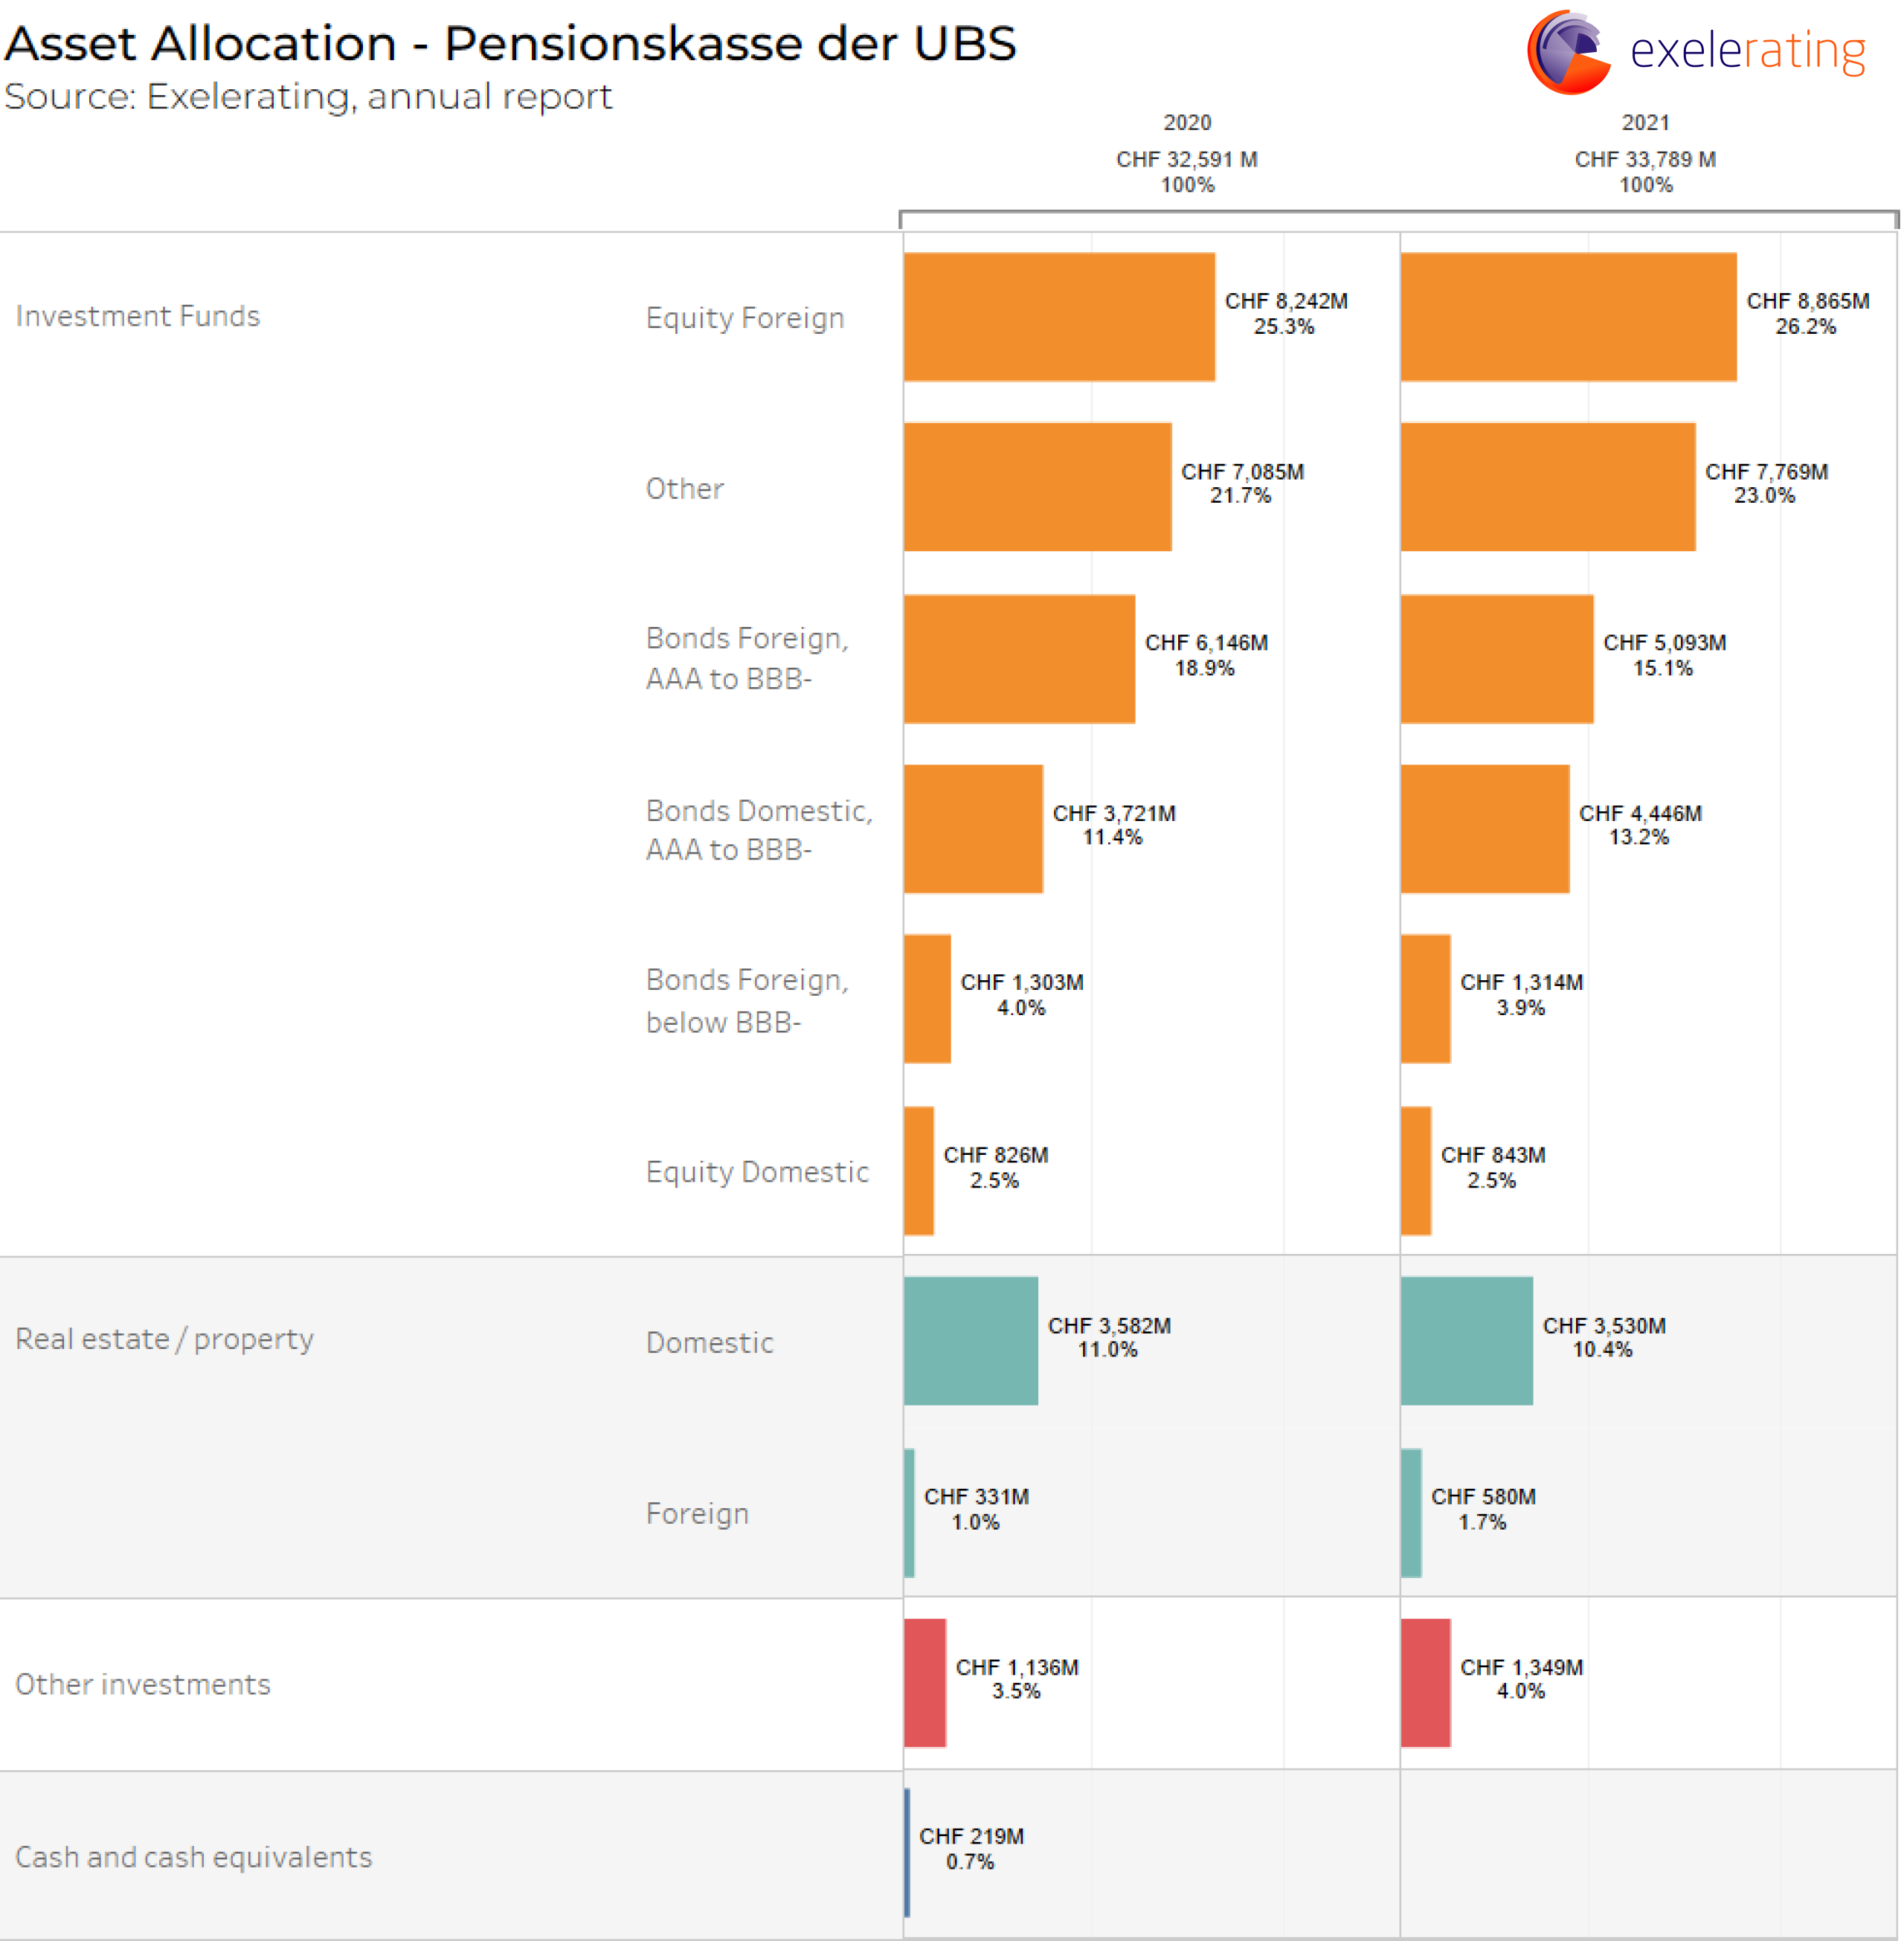 Breakdown of the asset allocation of pensionskasse der UBS in a horizontal bar chart.